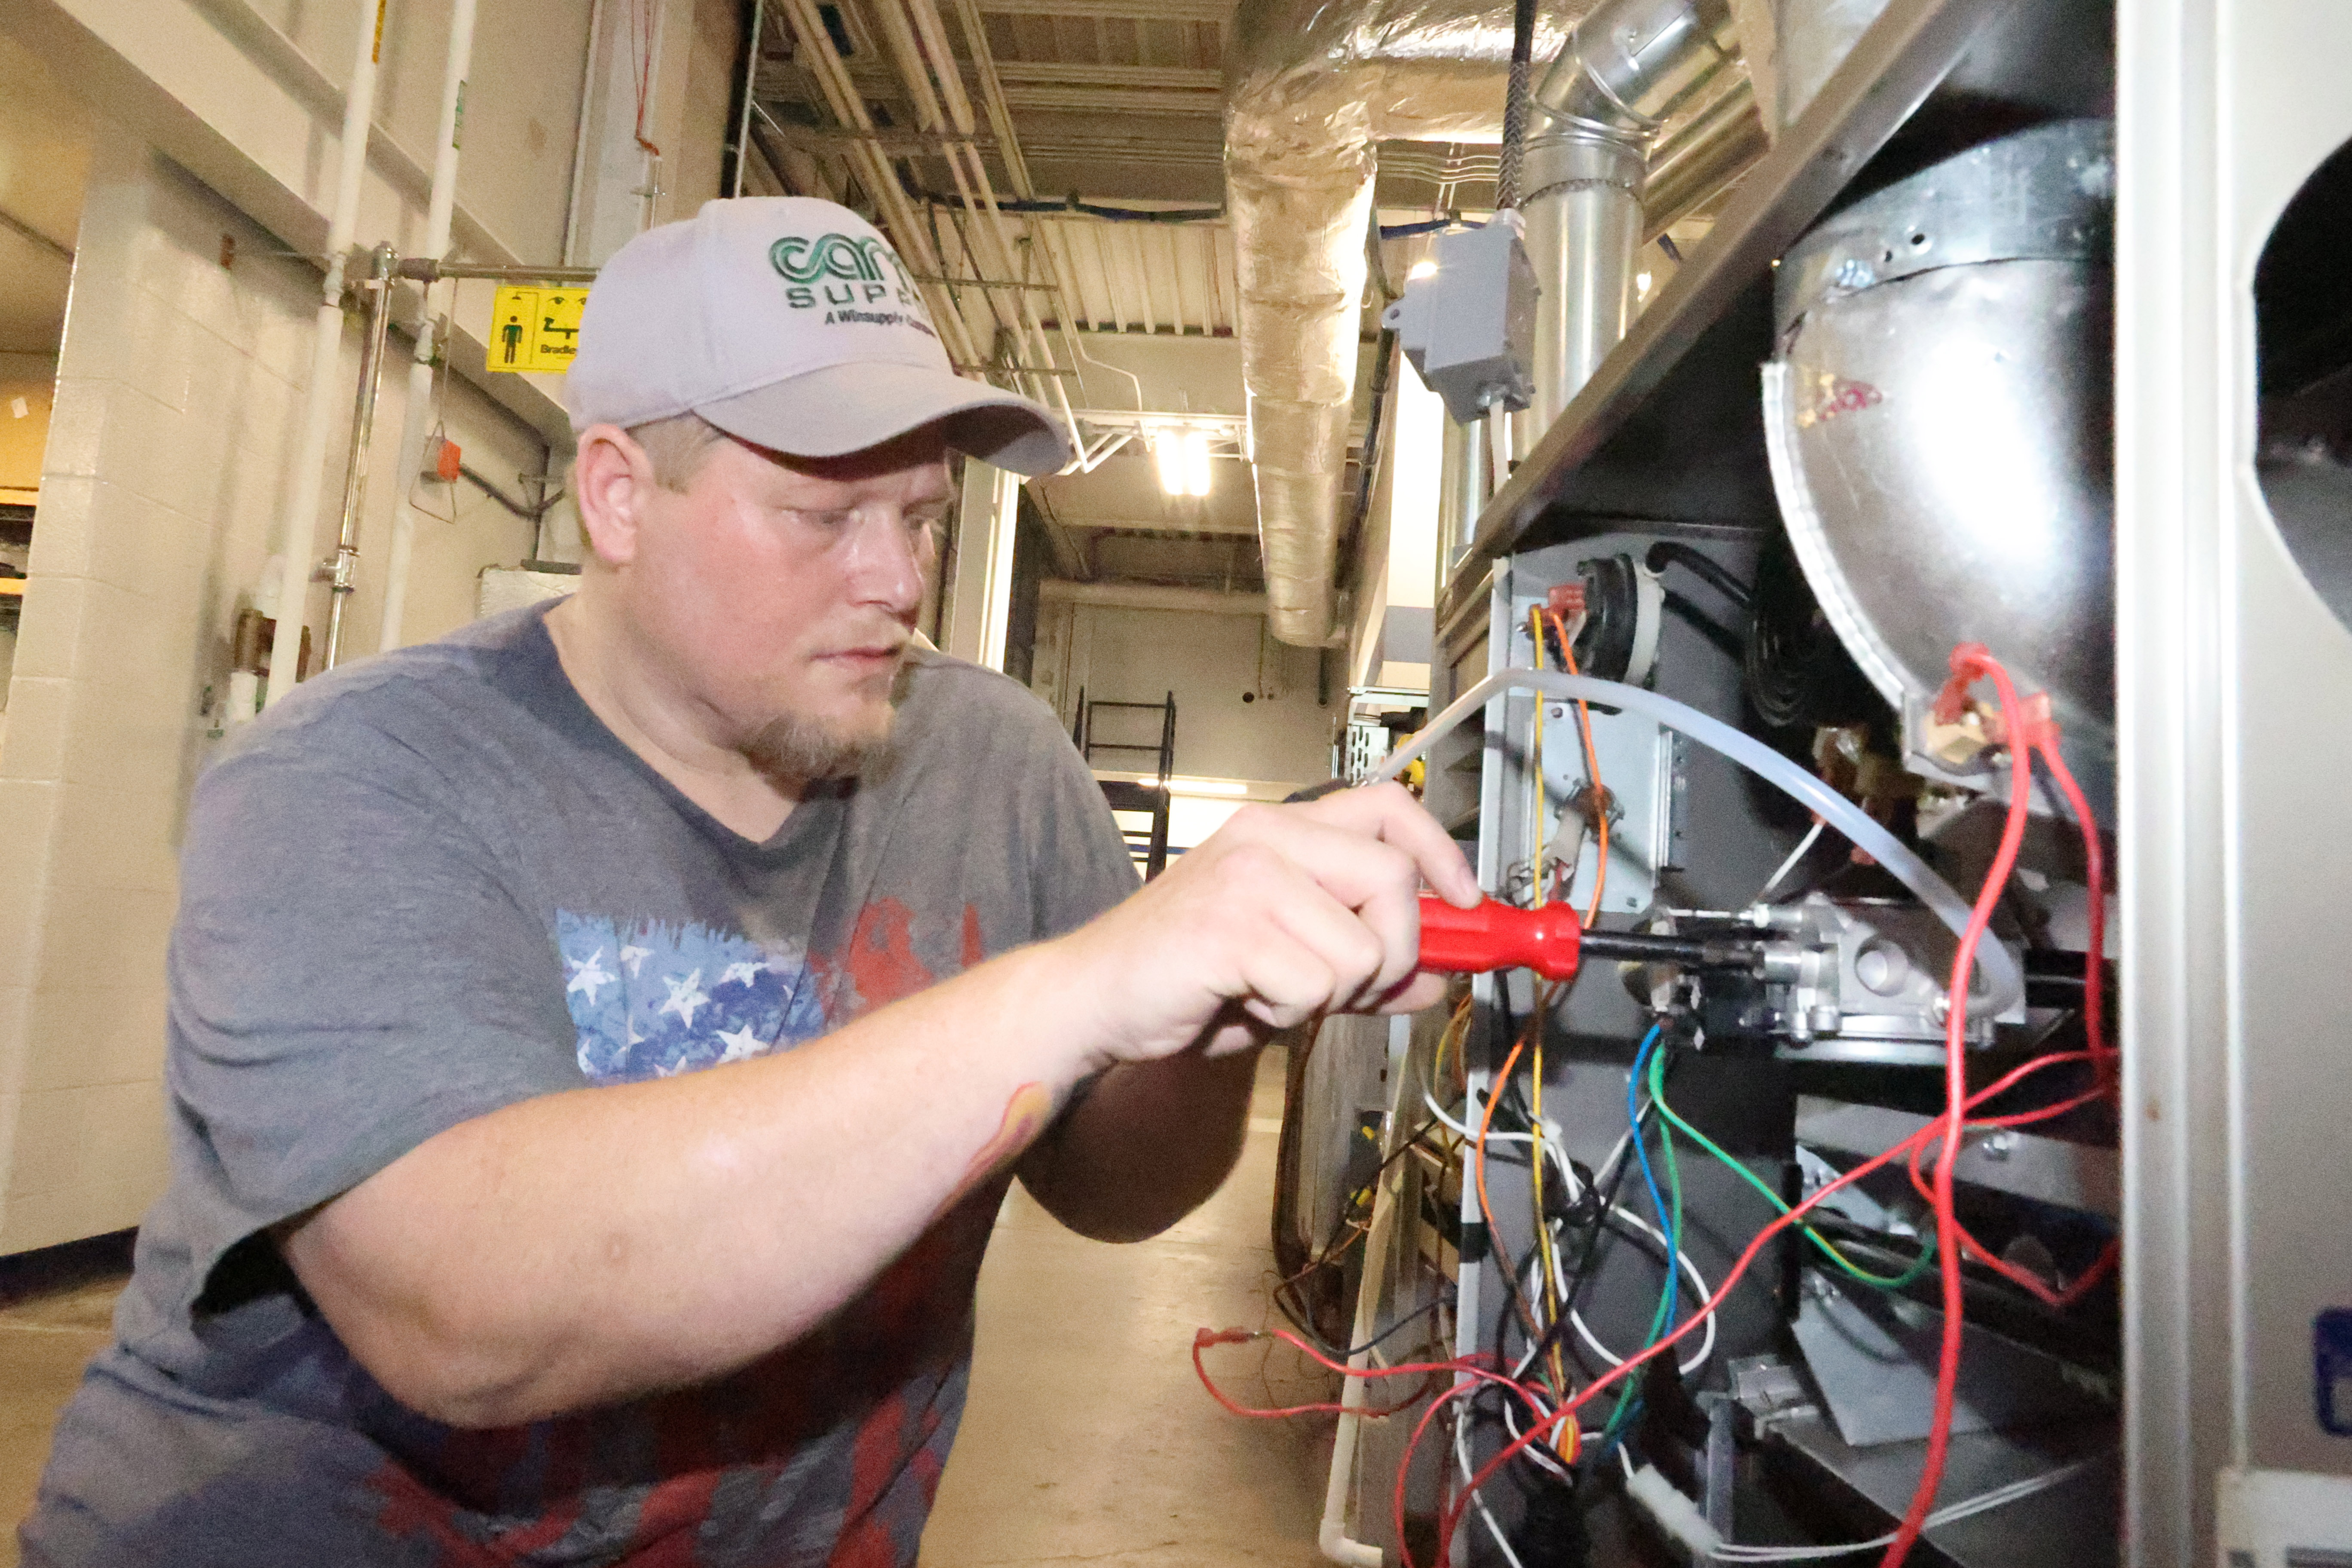 A White, male student lines up his screwdriver as he begins to prepare repairing an air conditioning unit.